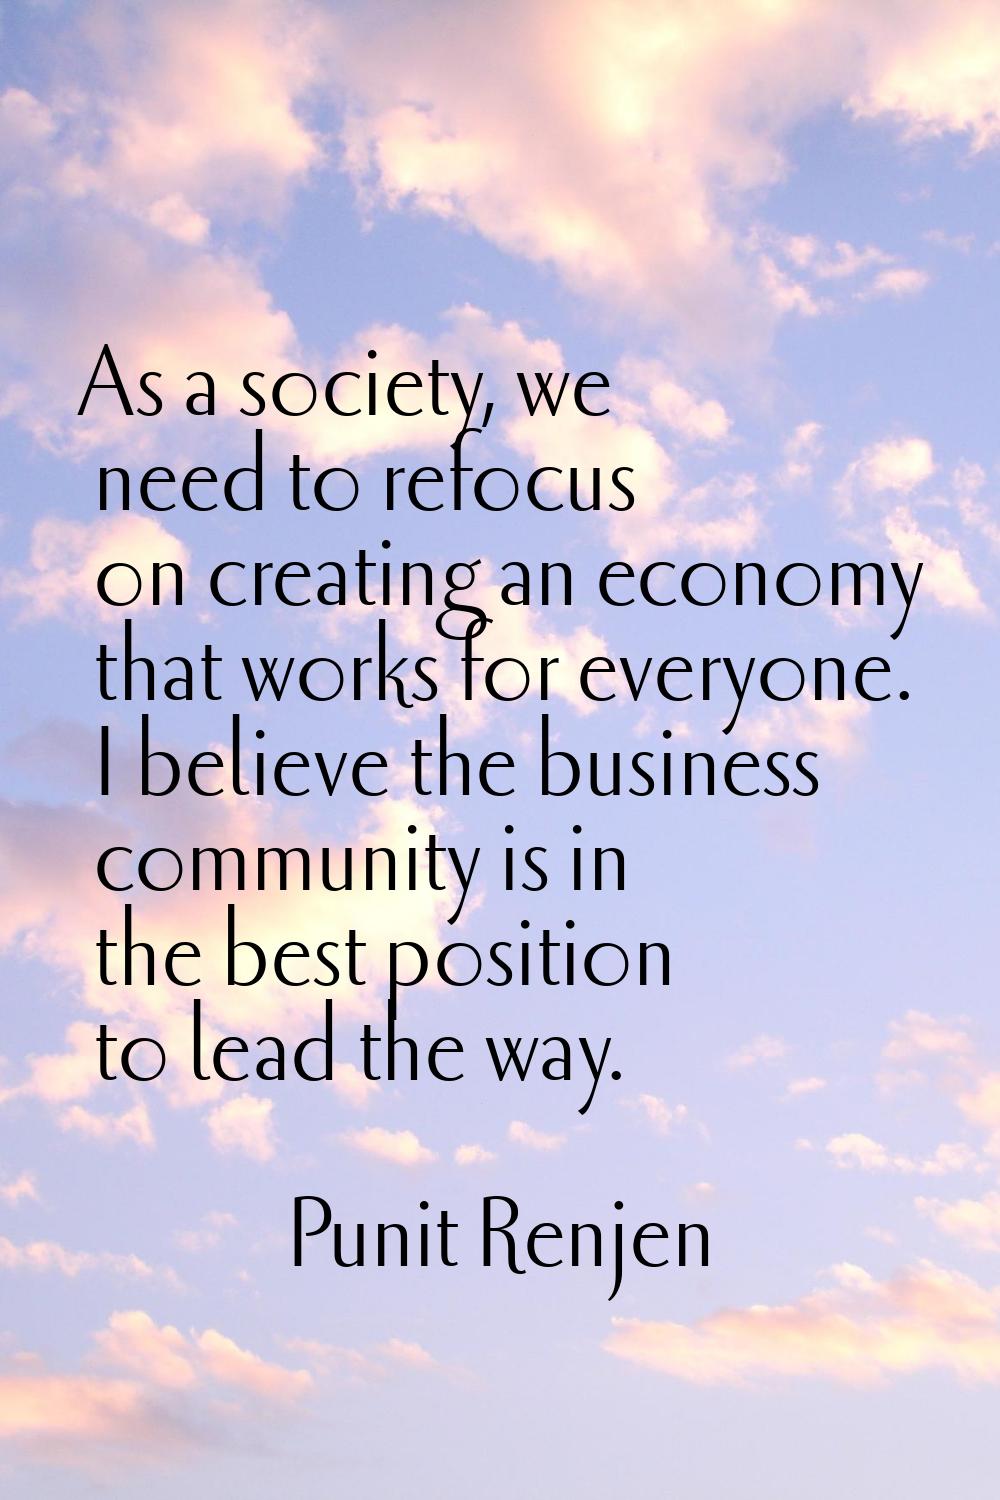 As a society, we need to refocus on creating an economy that works for everyone. I believe the busi